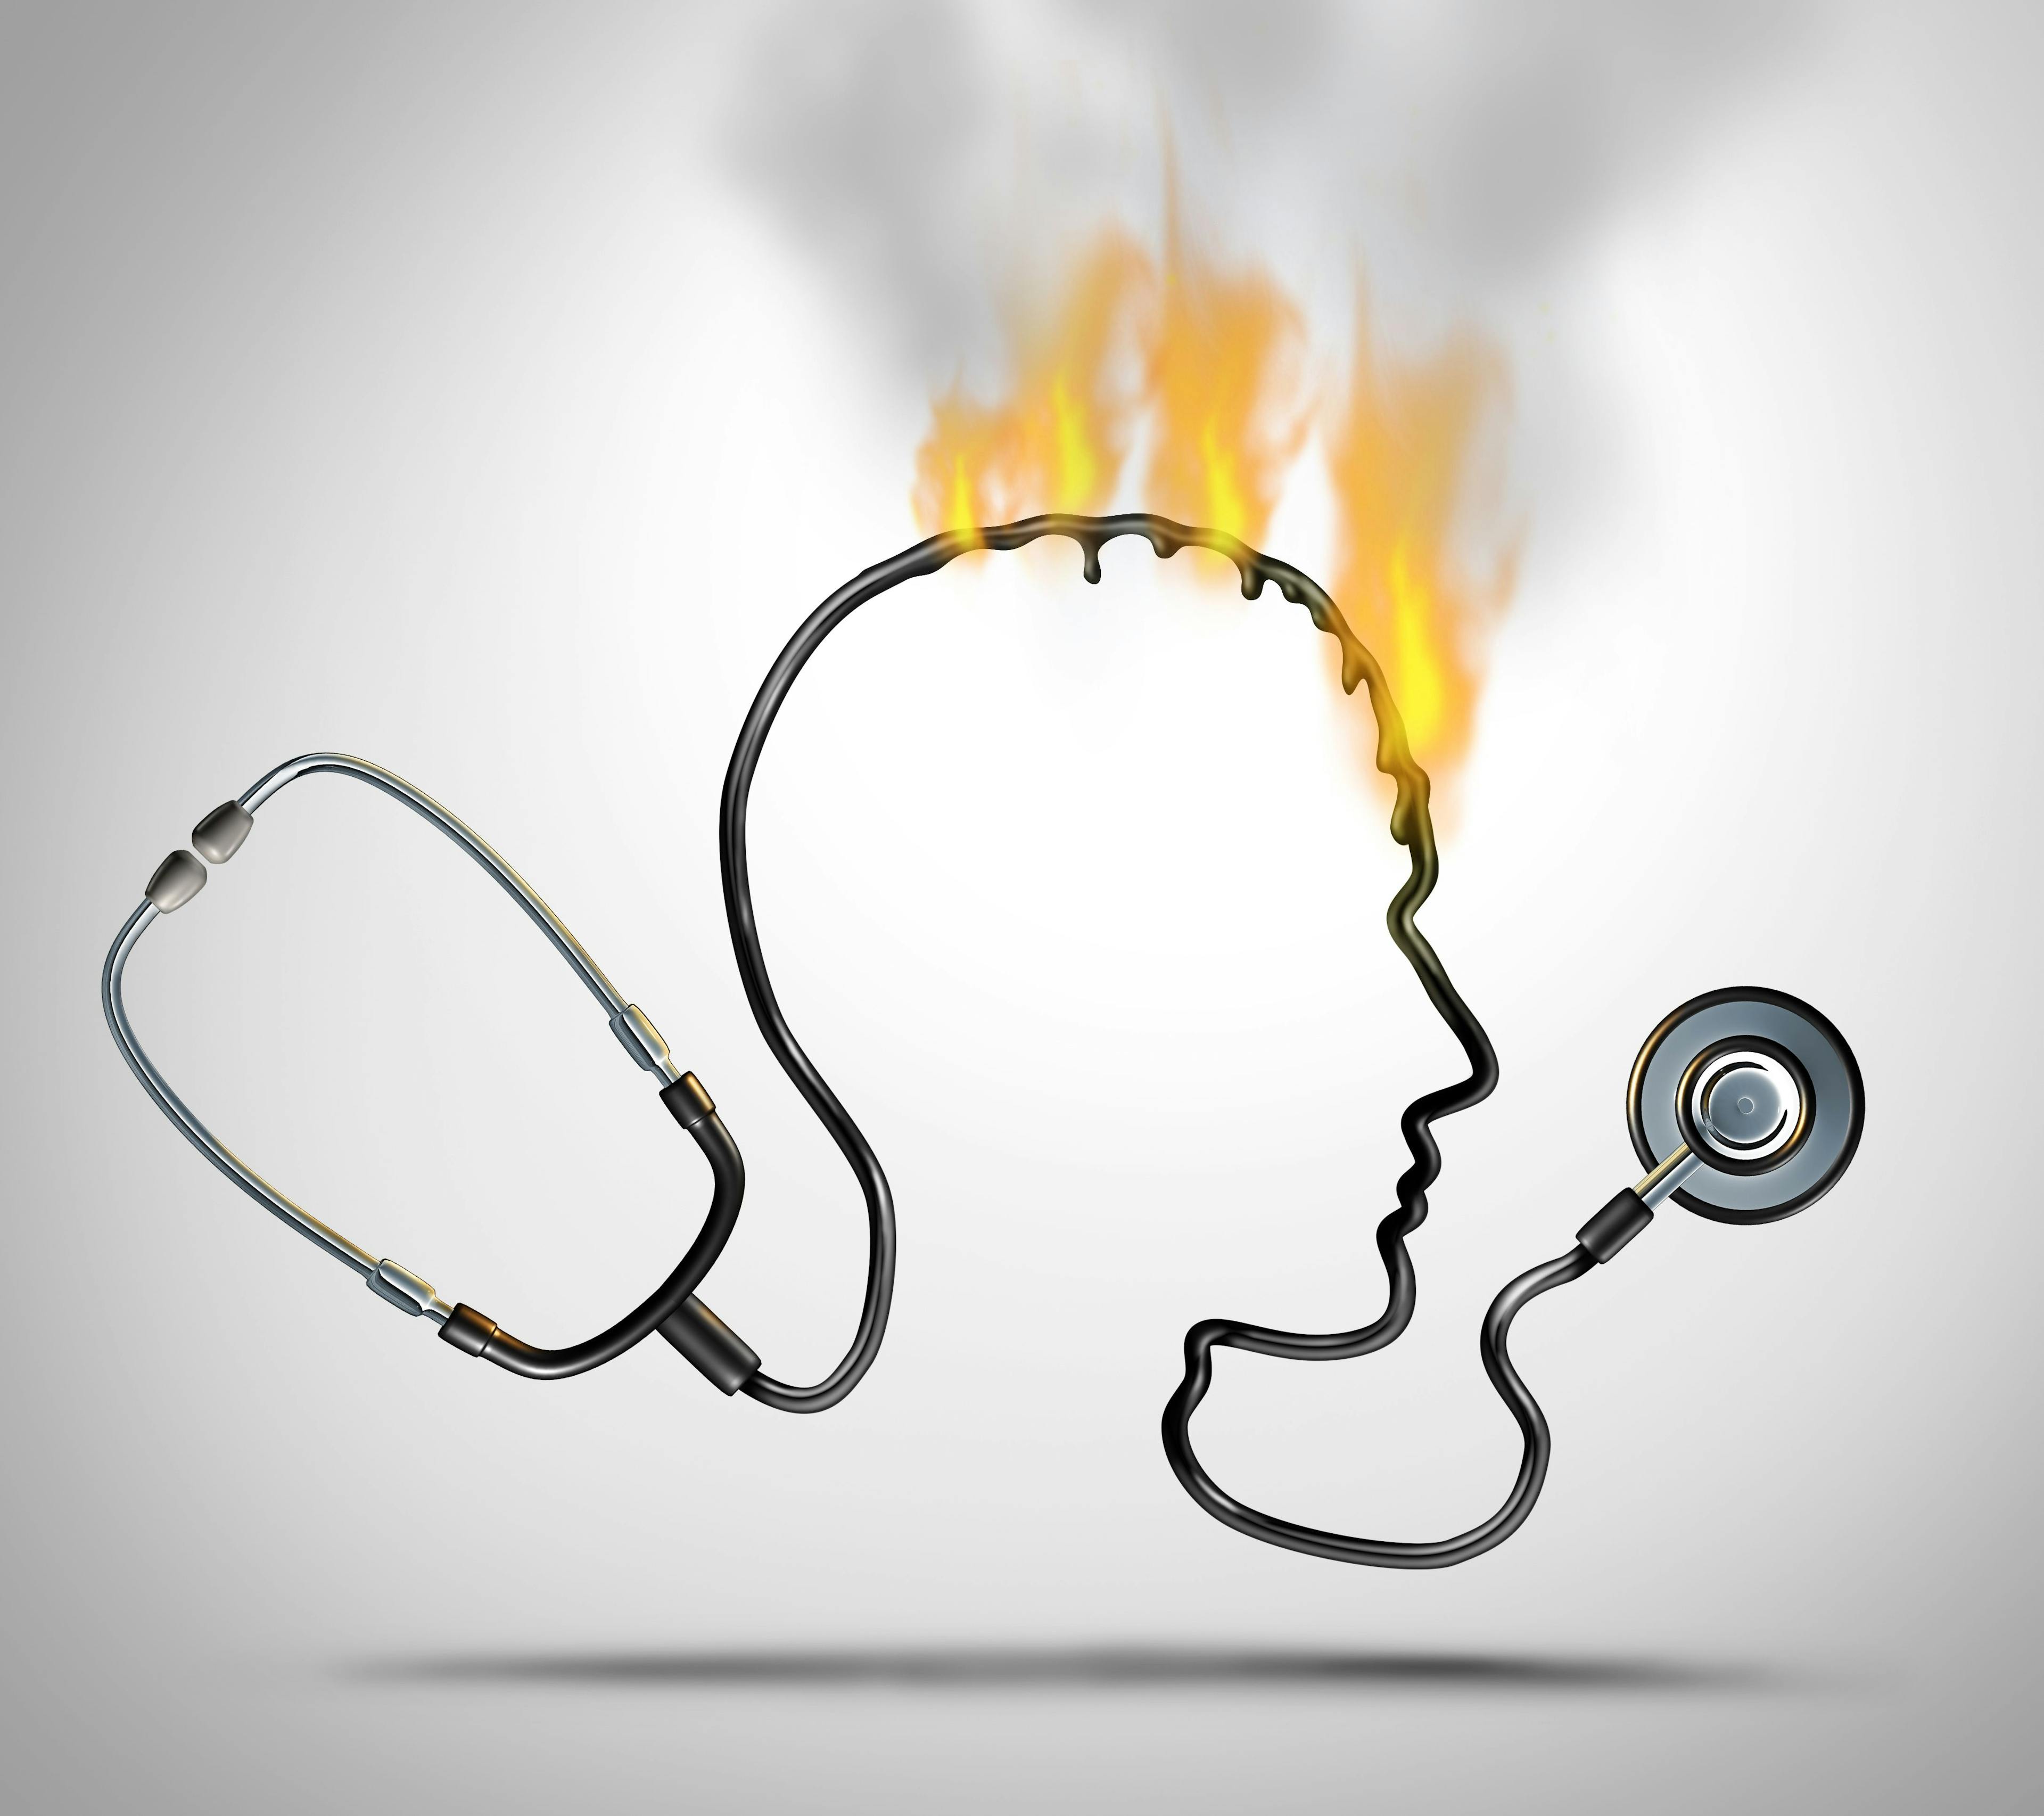 Physician burnout and staffing shortages are top concerns among doctors worldwide